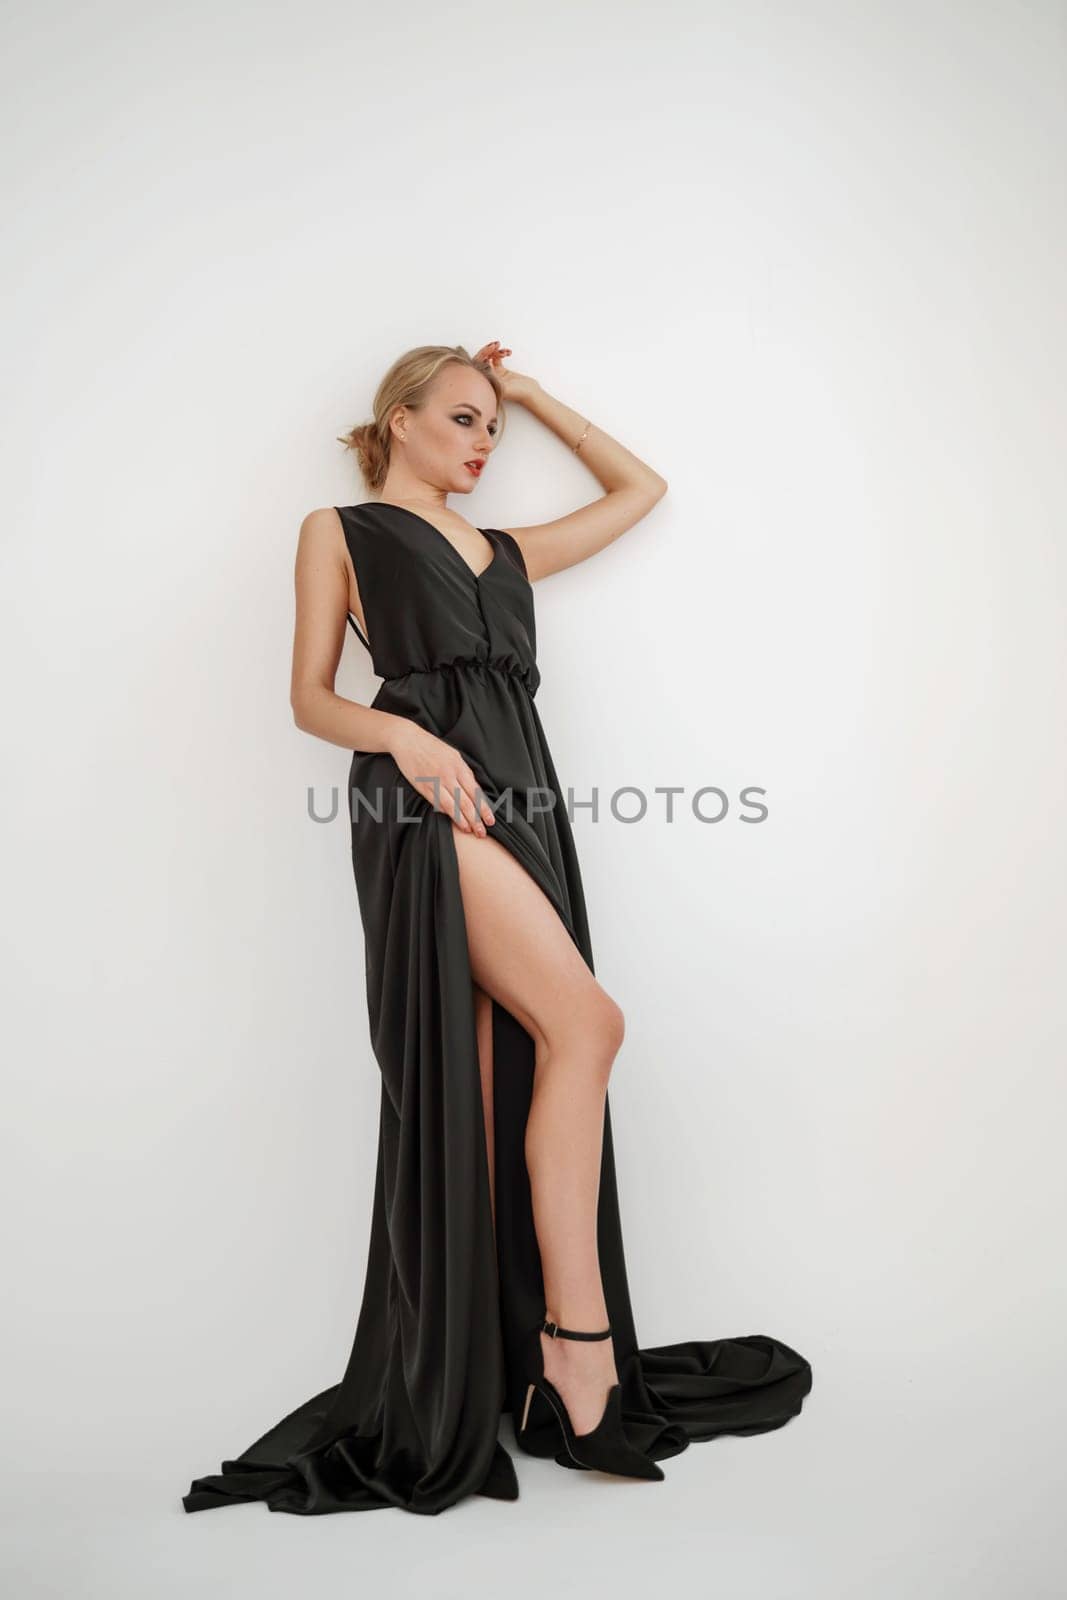 Woman in black dress on white background in the studio. Elegant lady in long gown showing leg. Sexy girl in formal high slit prom dress. by Matiunina